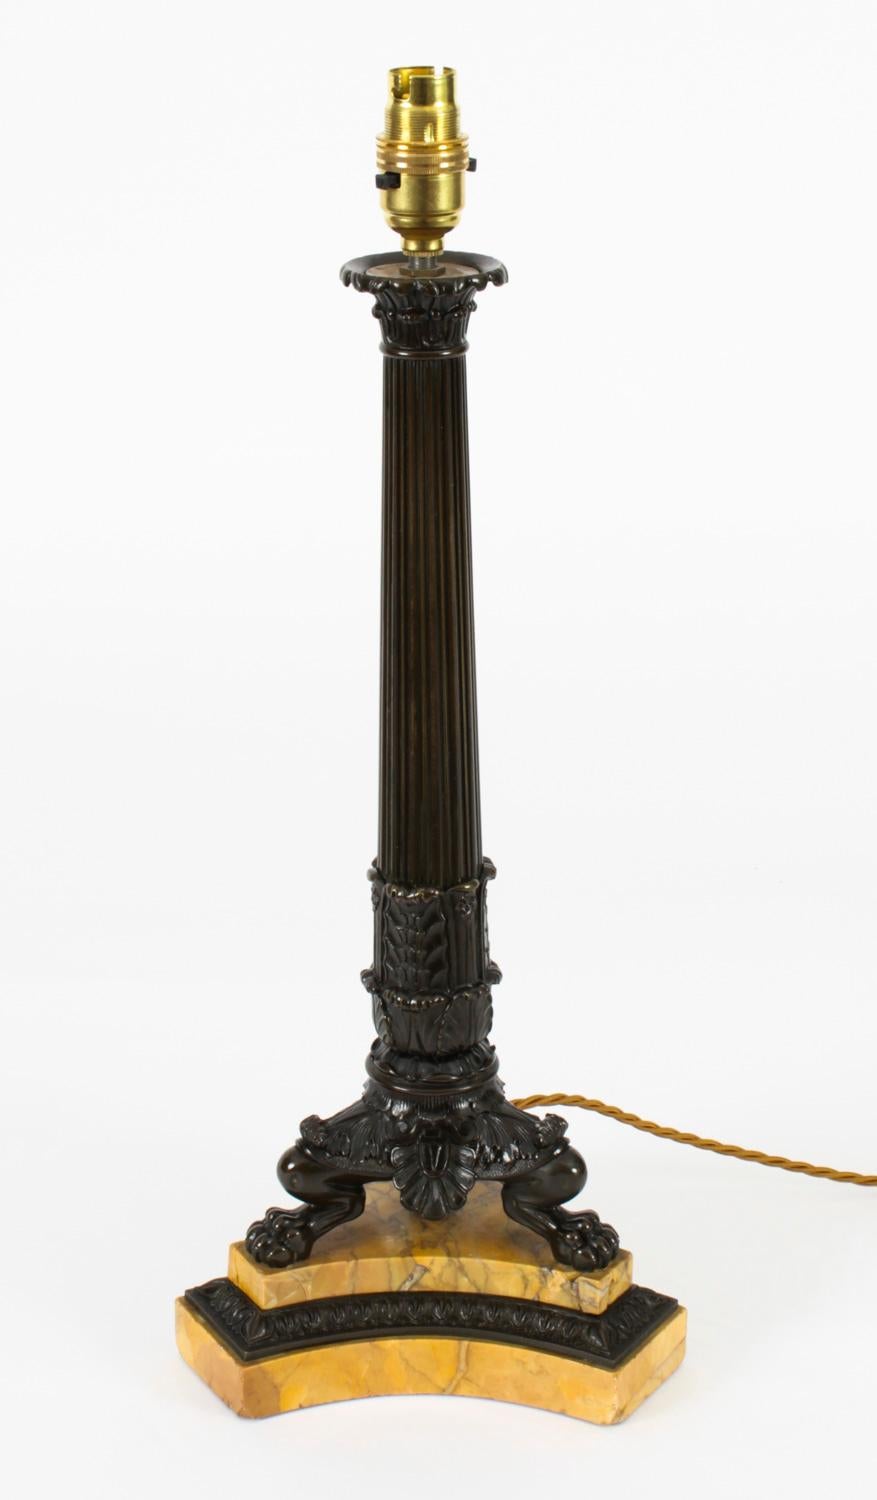 An elegant French Empire bronze and marble table lamp, circa 1820 in date.

The candlestick later converted into a lamp features an ancanthus capital, a fluted tapering column on claw feet raised on a shaped triangular Siena marble and bronze